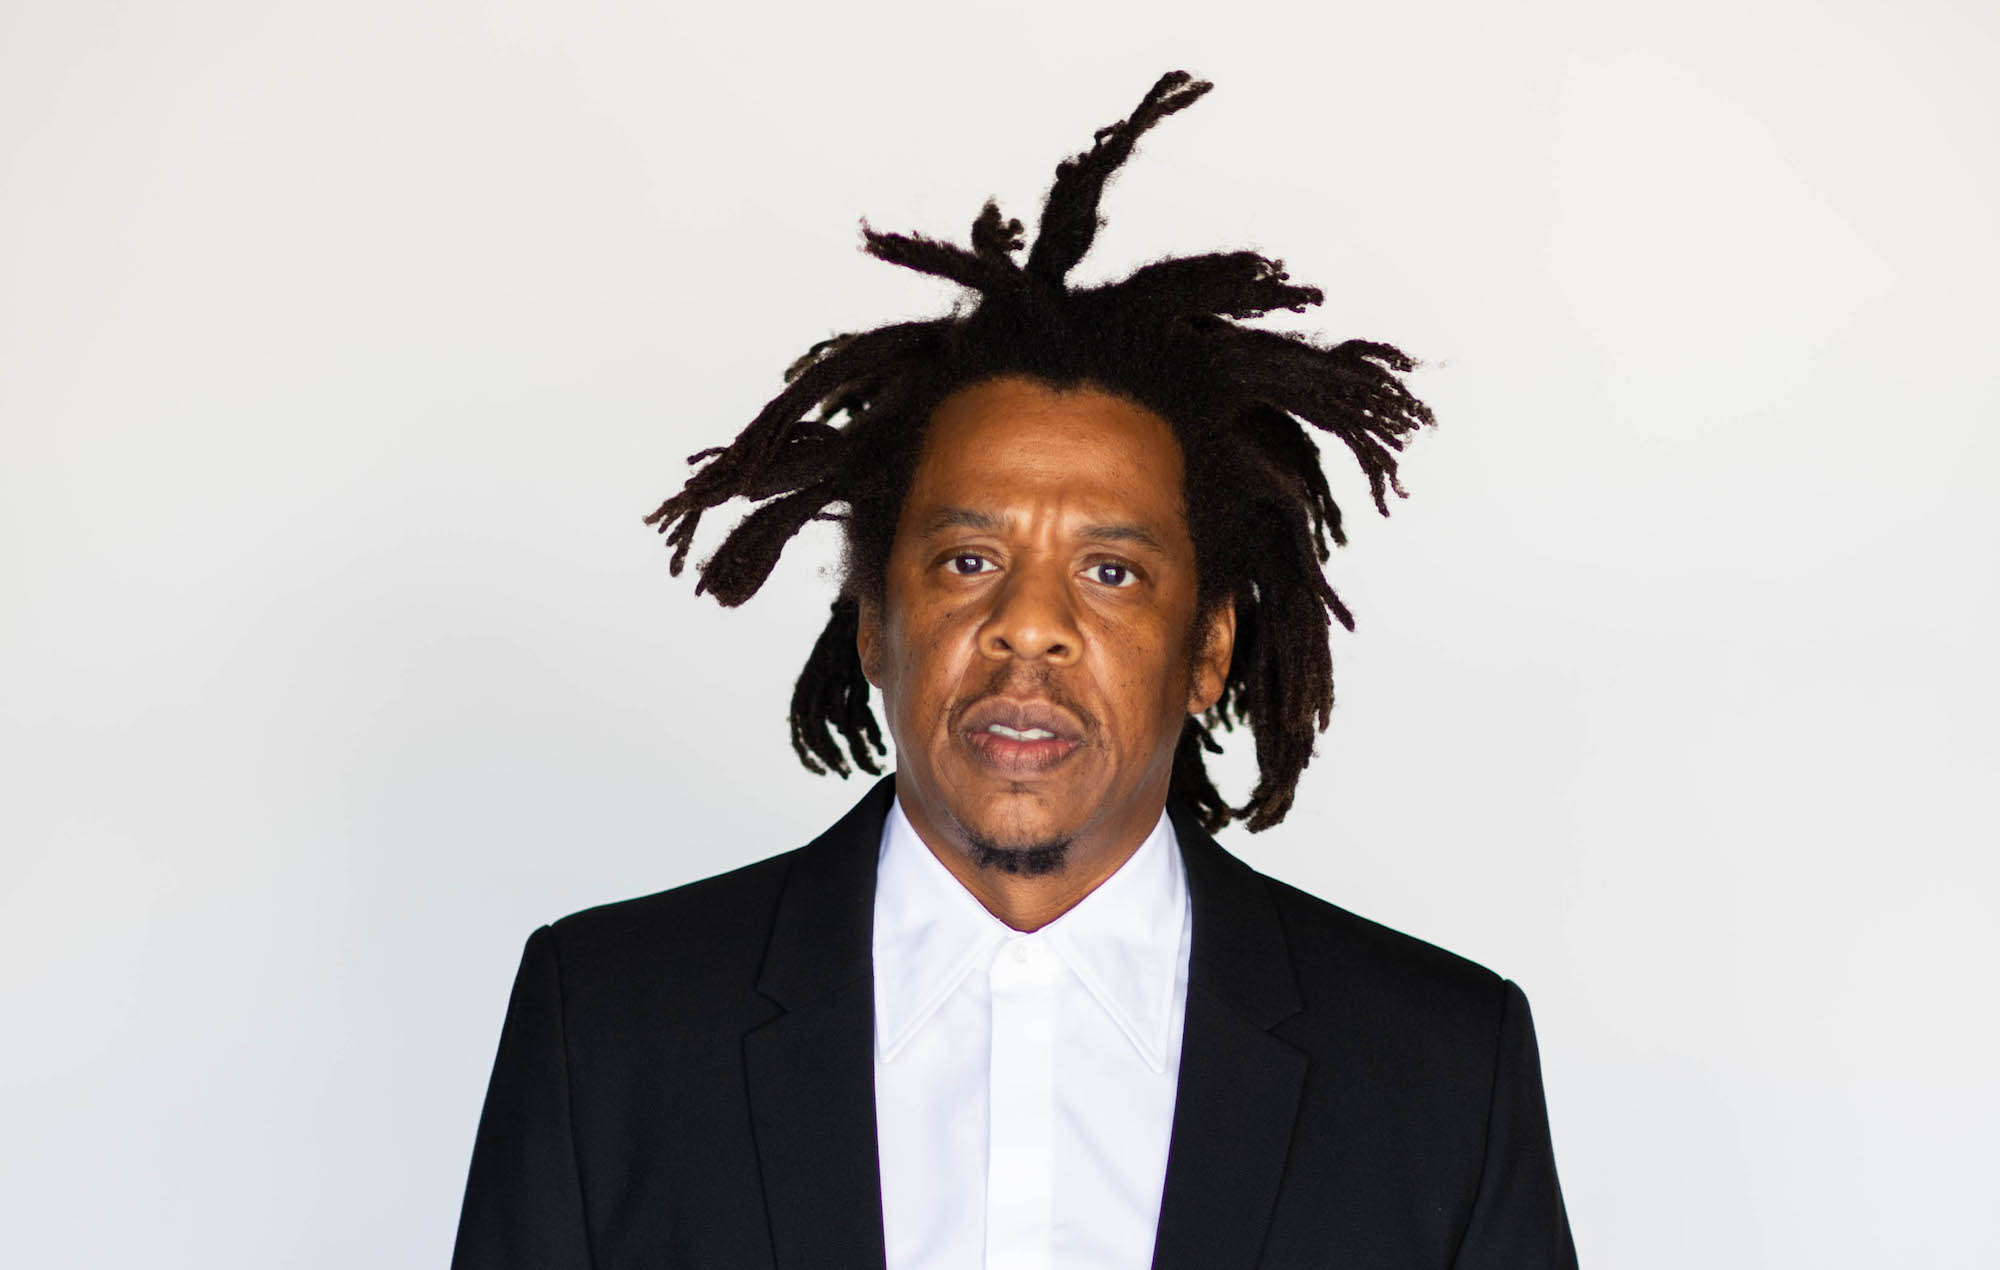 jay-z-advises-fans-to-choose-500k-over-dinner-with-him-its-a-bad-deal